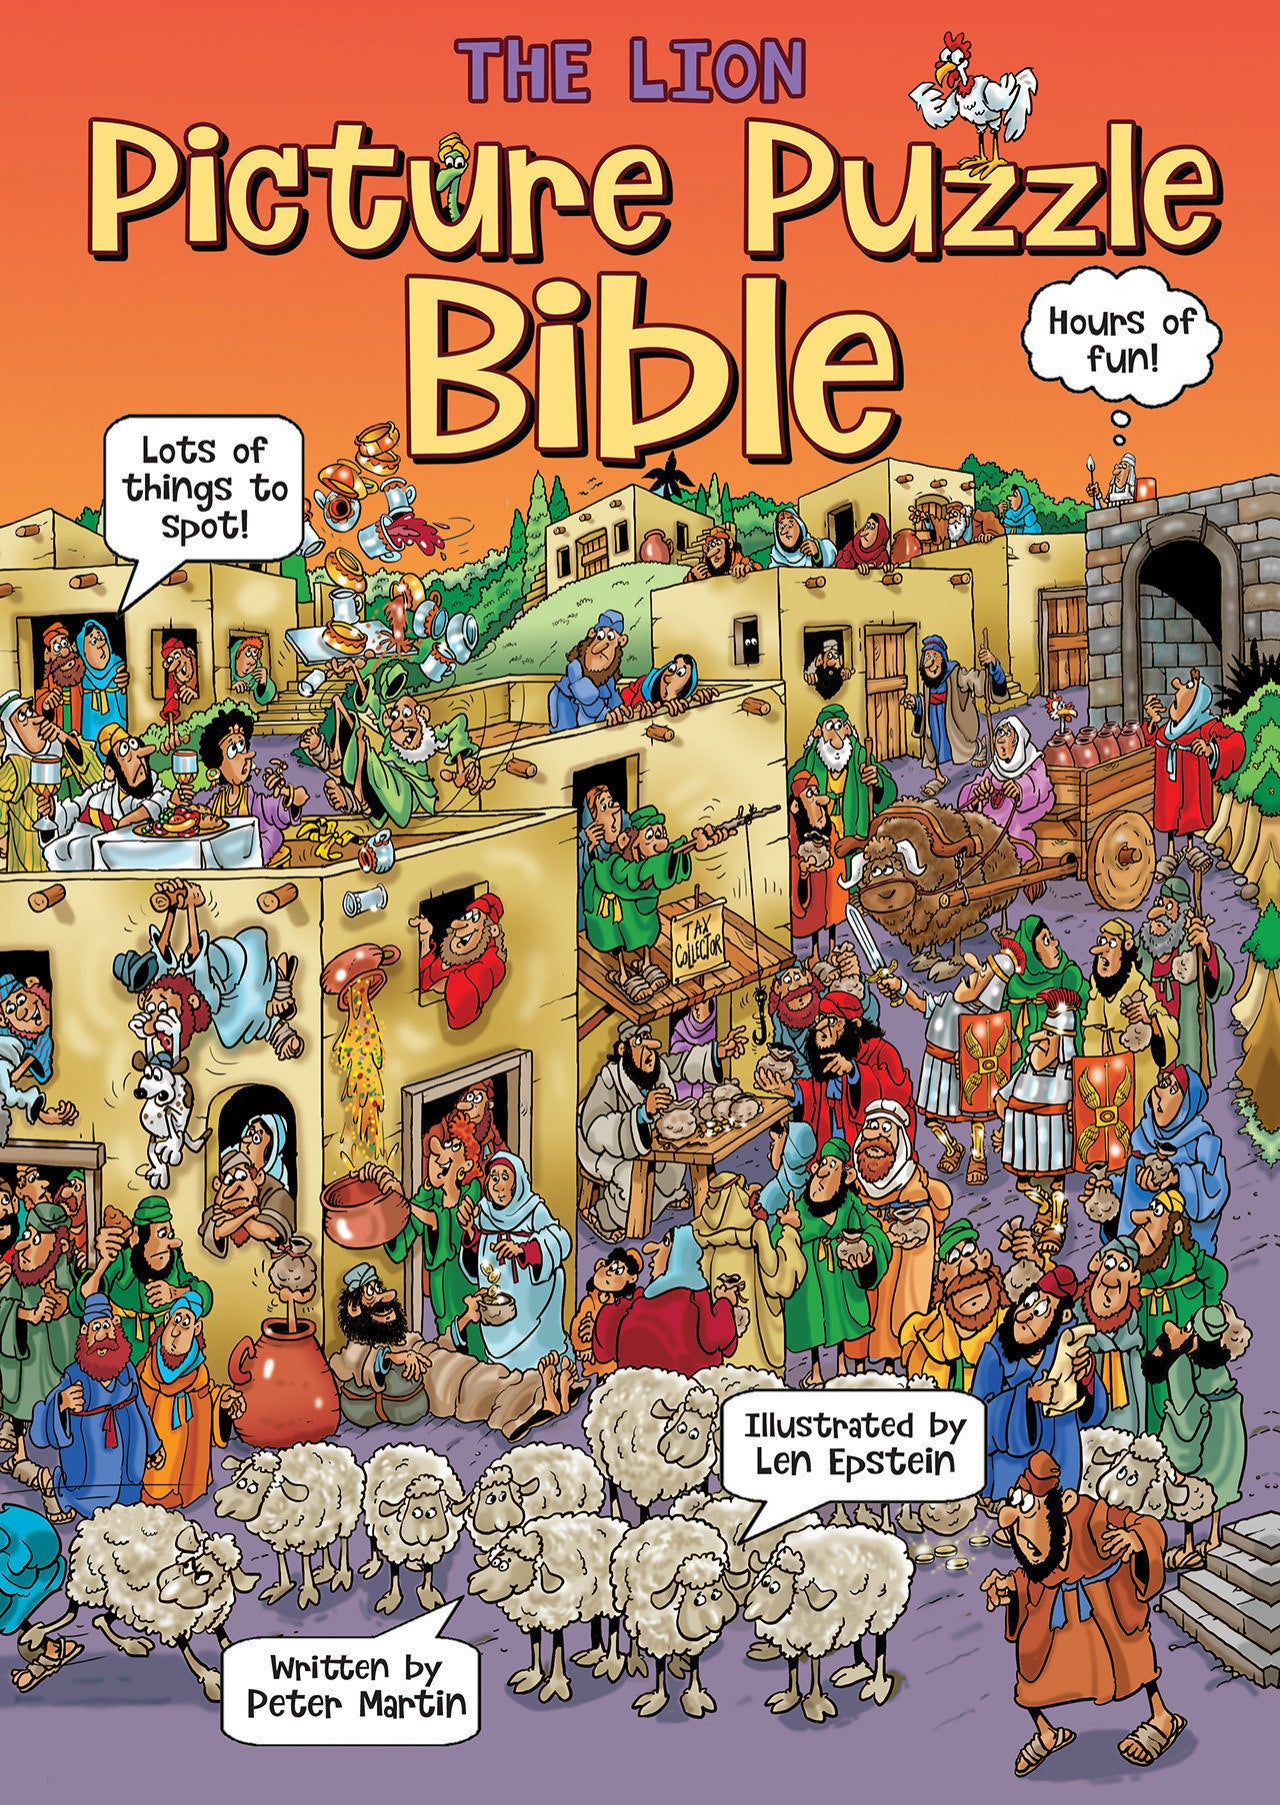 Image of The Lion Picture Puzzle Bible other